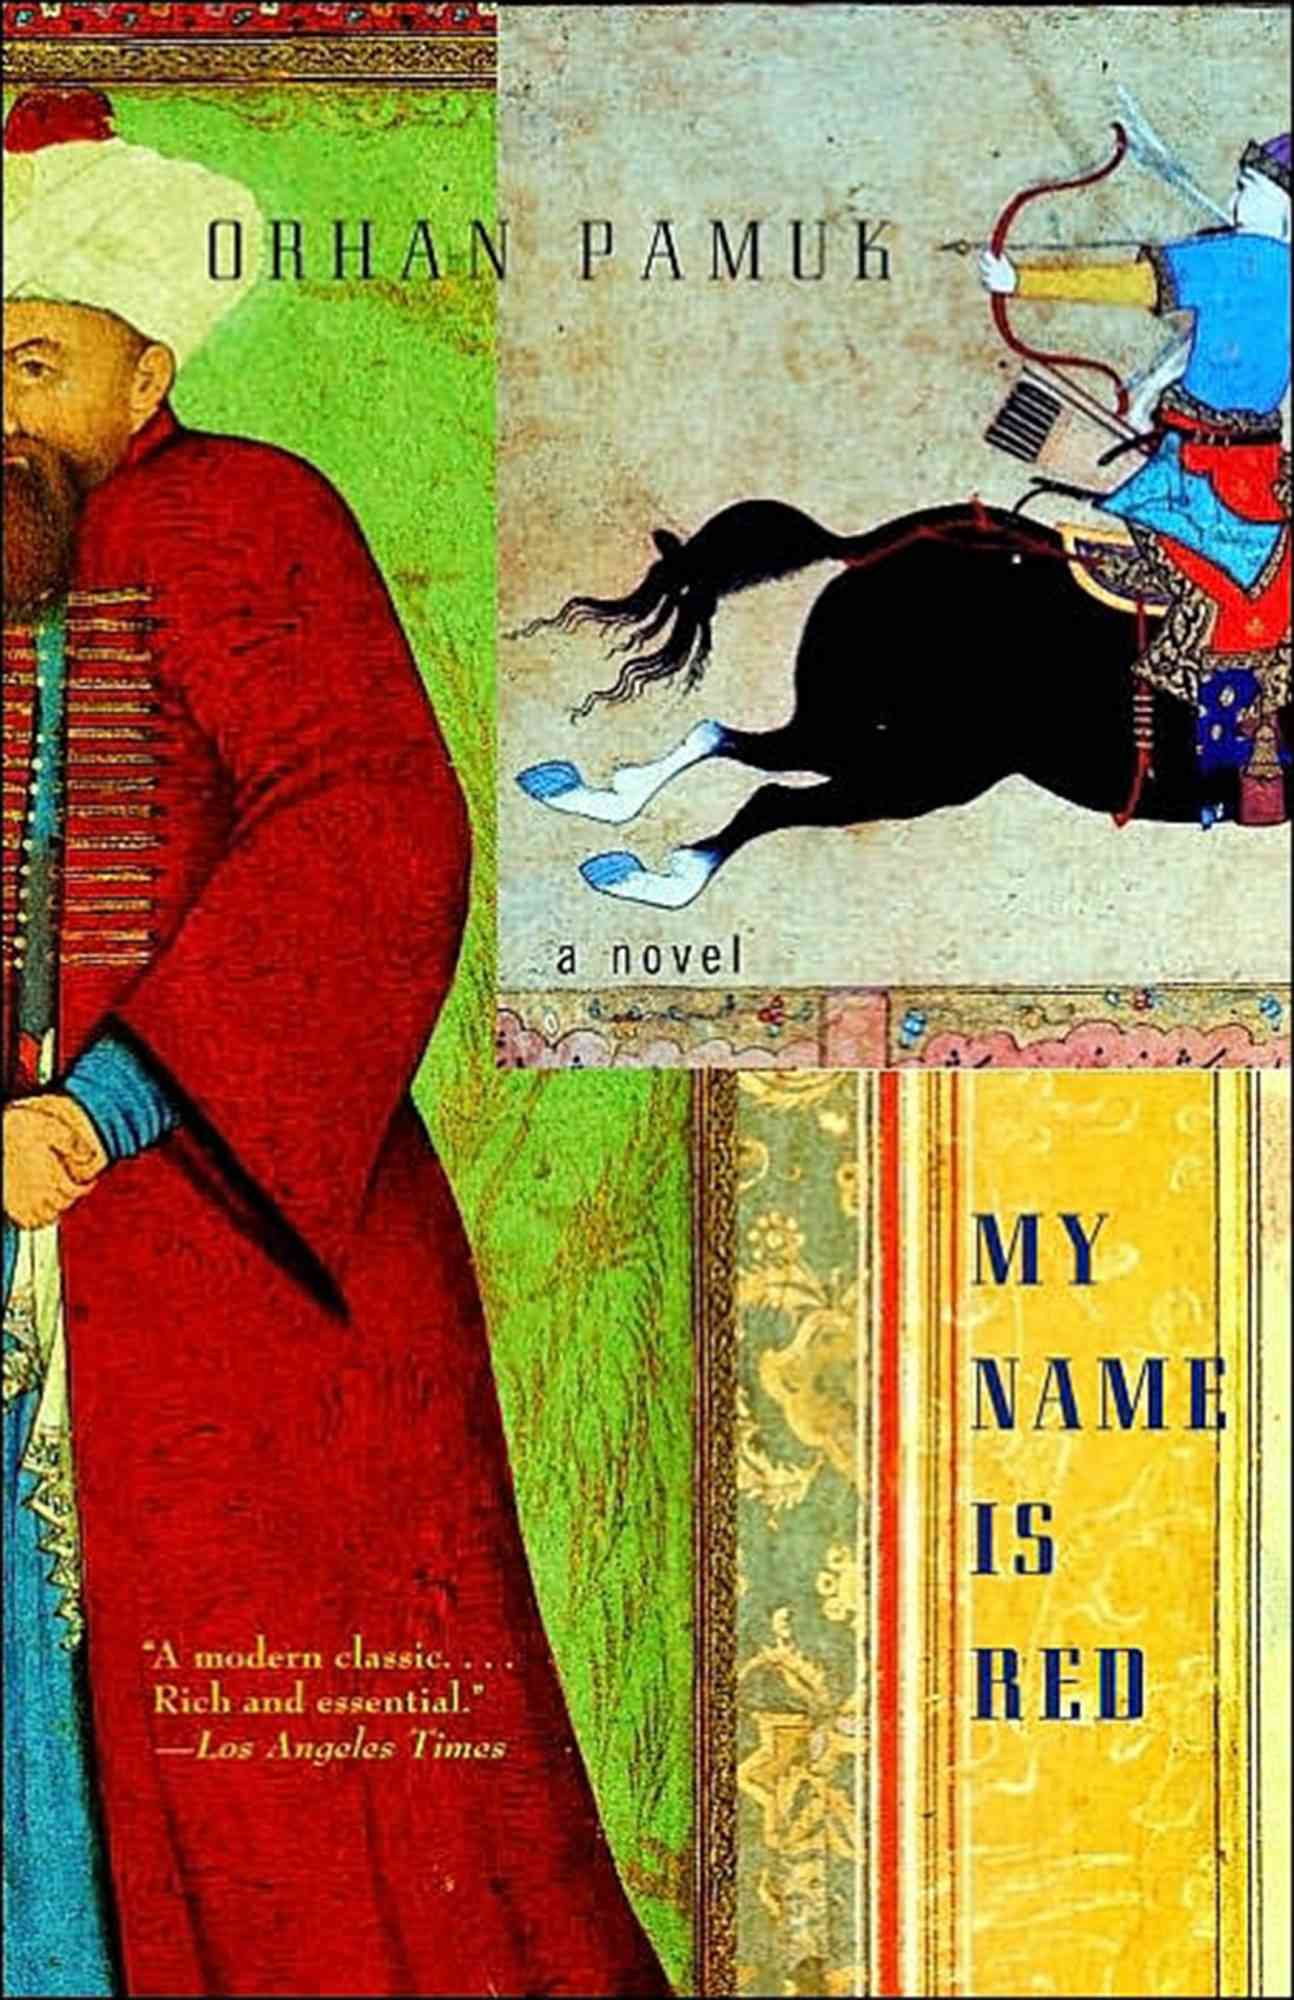 My Name Is Red  by Orhan Pamuk